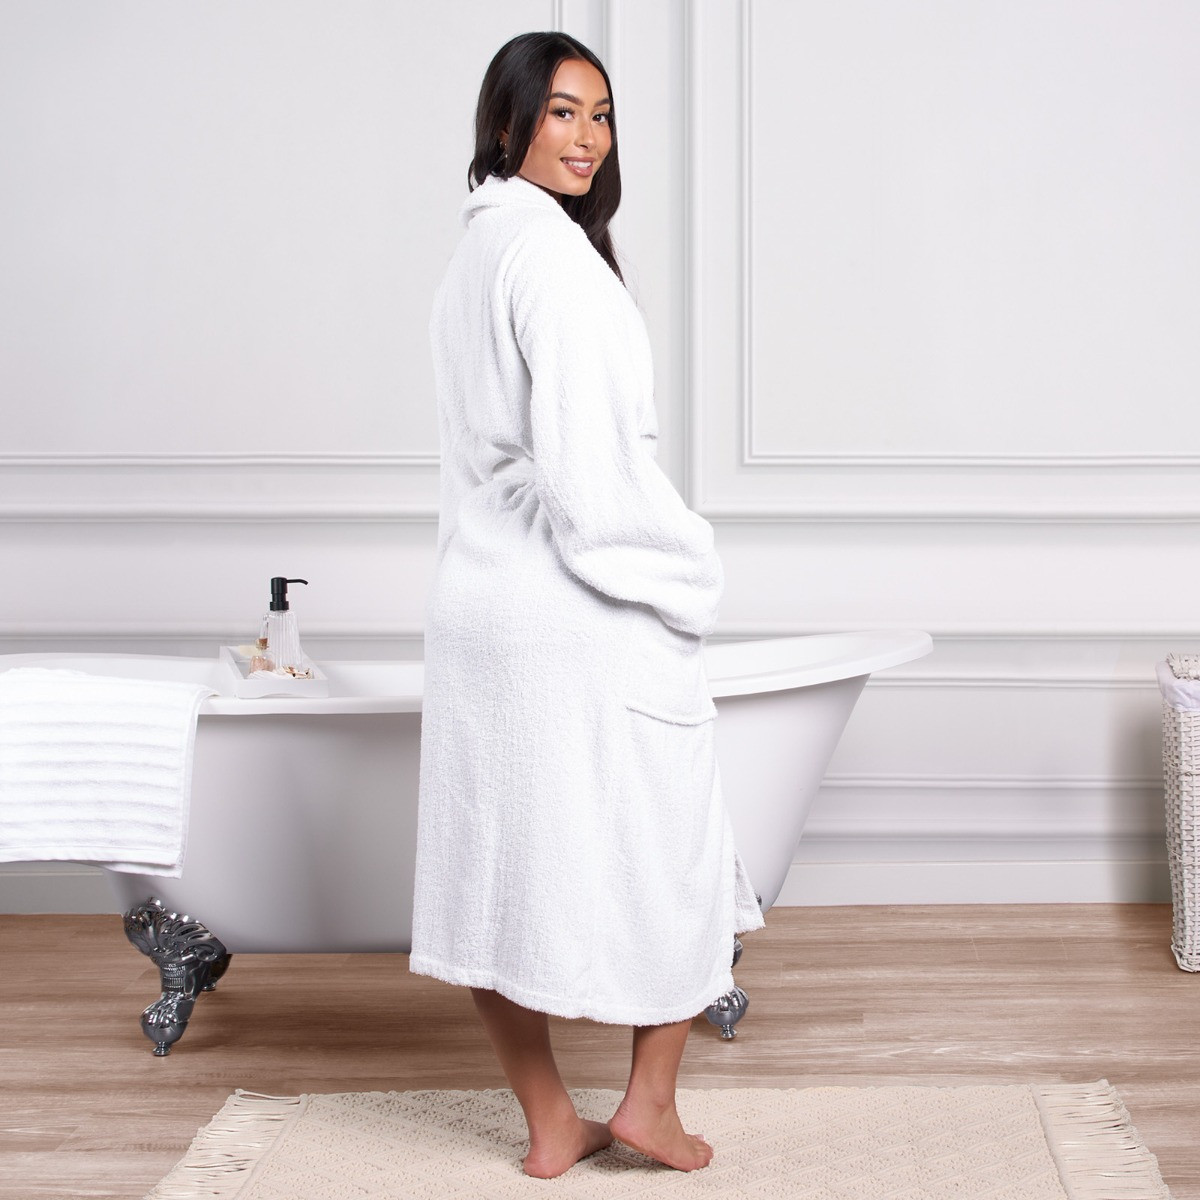 Muslin dressing gown - White - Home All | H&M IN